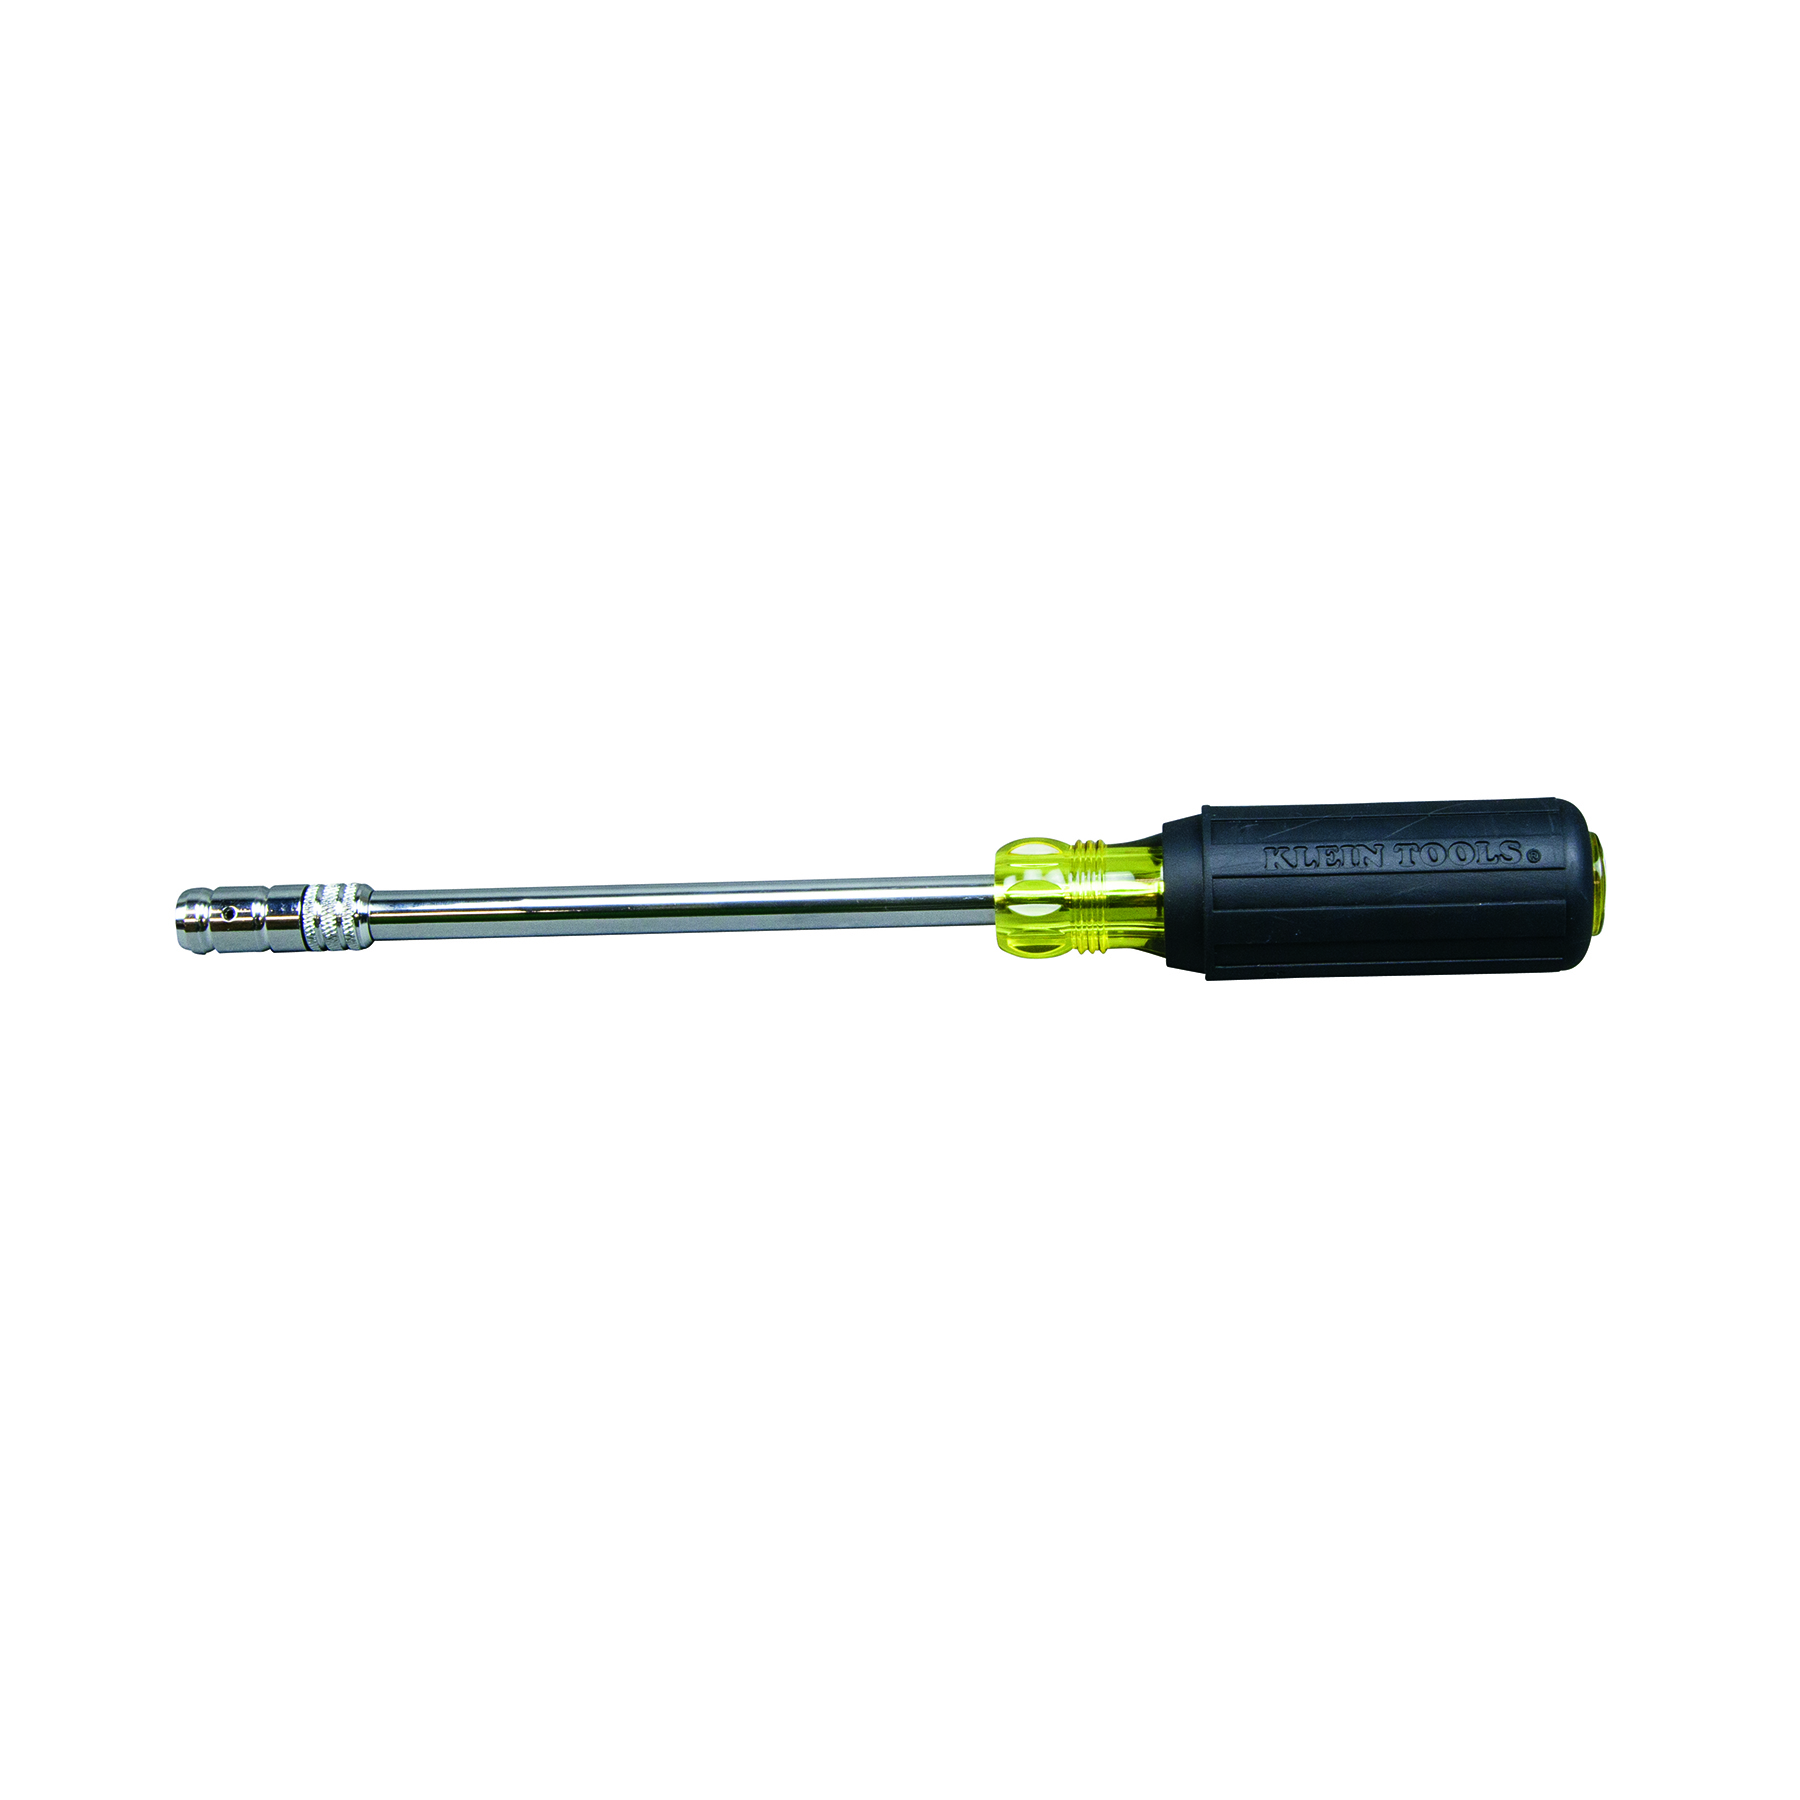 NUT DRIVER, HEX HEAD2-IN-1, 6"